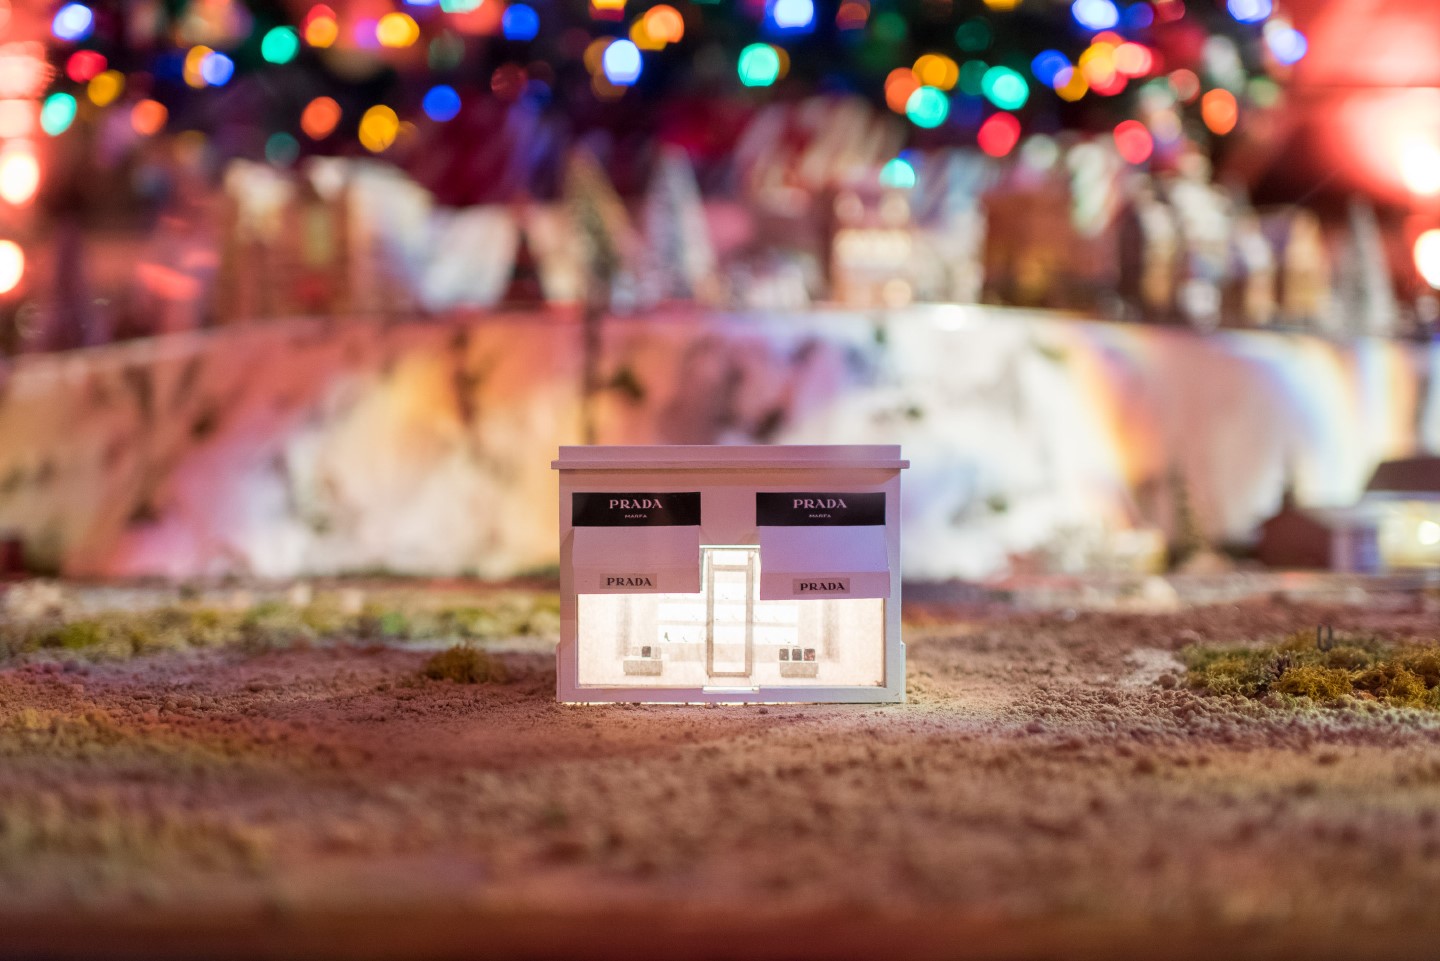 Among the additions to this year’s Christmas Village at Bayou Bend are Texas-inspired updates to the model train set, handcrafted by conservators Steve Pine and Trevor Boyd, with the help of other MFAH staff members.